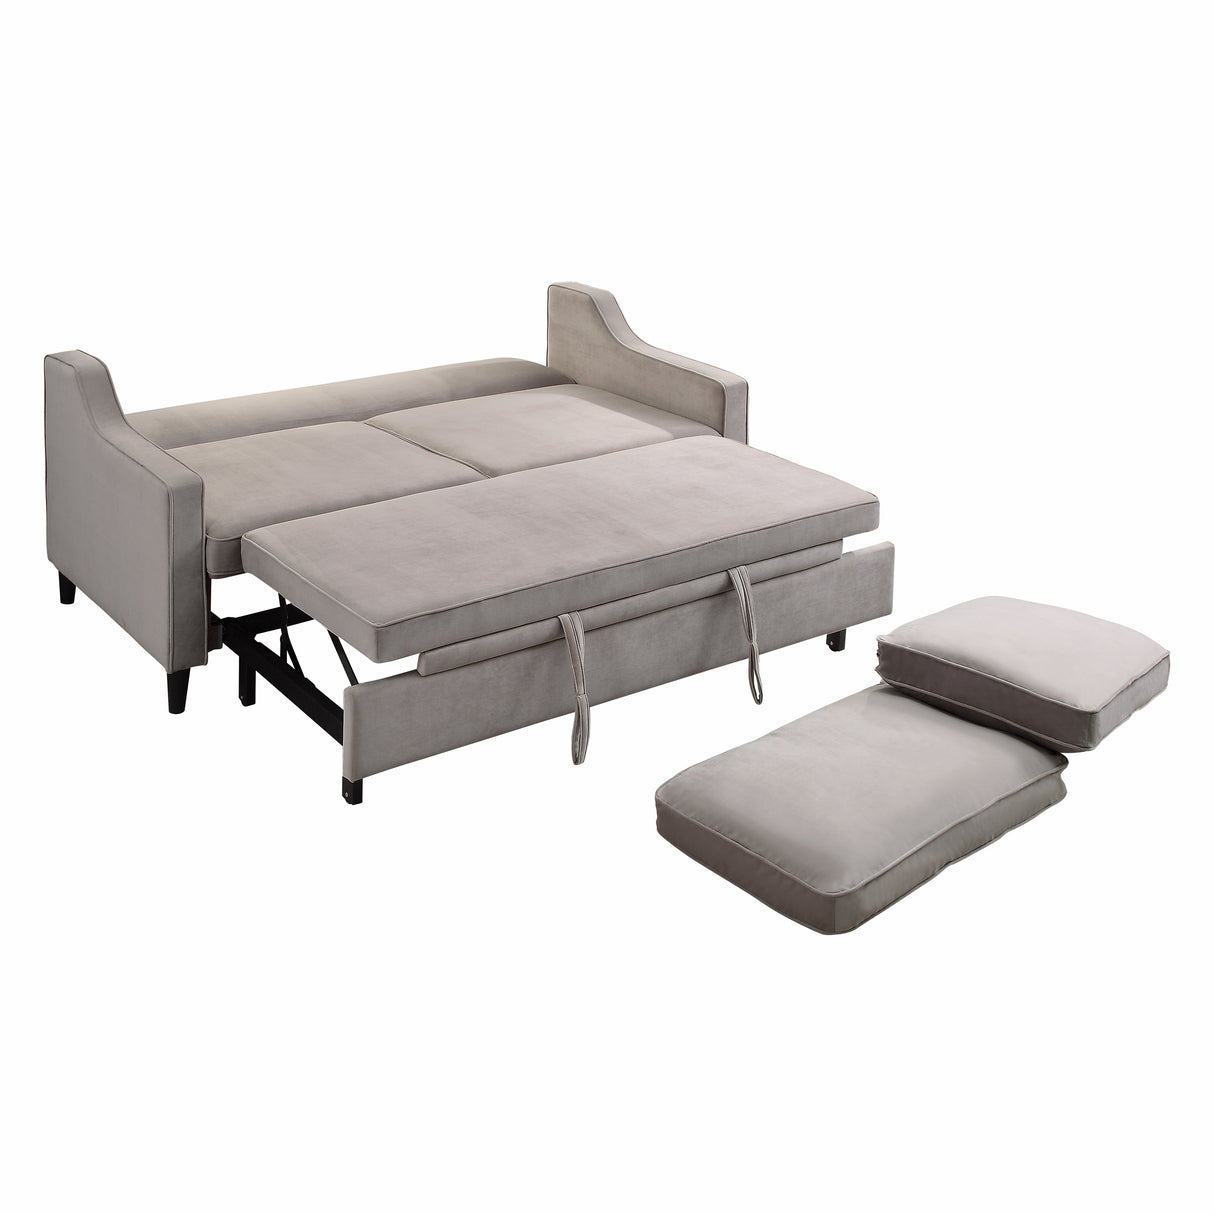 Adelia Cobblestone Convertible Studio Sofa With Pull-Out Bed